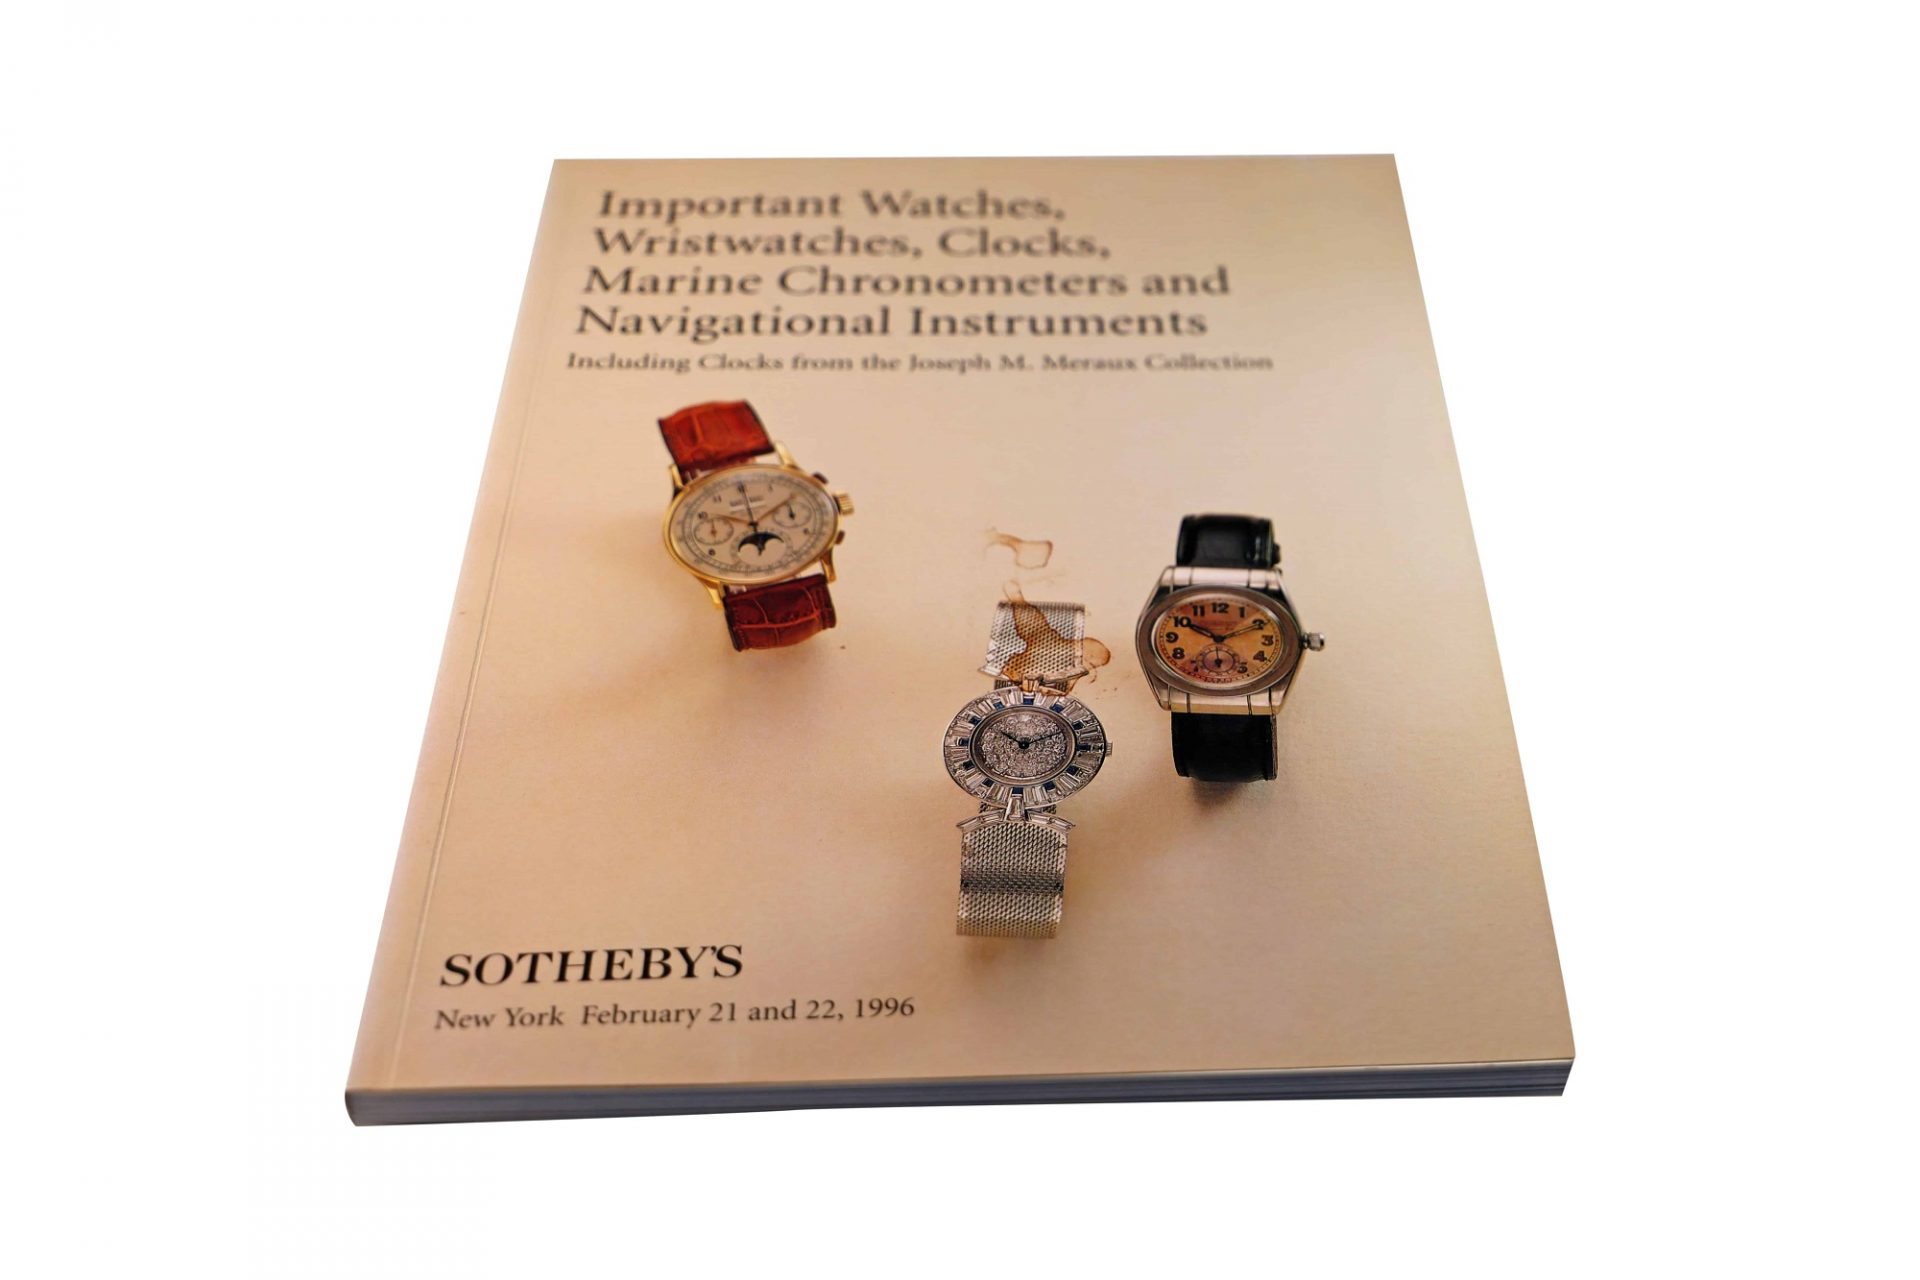 Sotheby's Important Watches, wristwatches, Clocks, Marine Chronometers And Navigational Instruments New York February 21, 1996 Auction Catalog - Rare Watch Parts